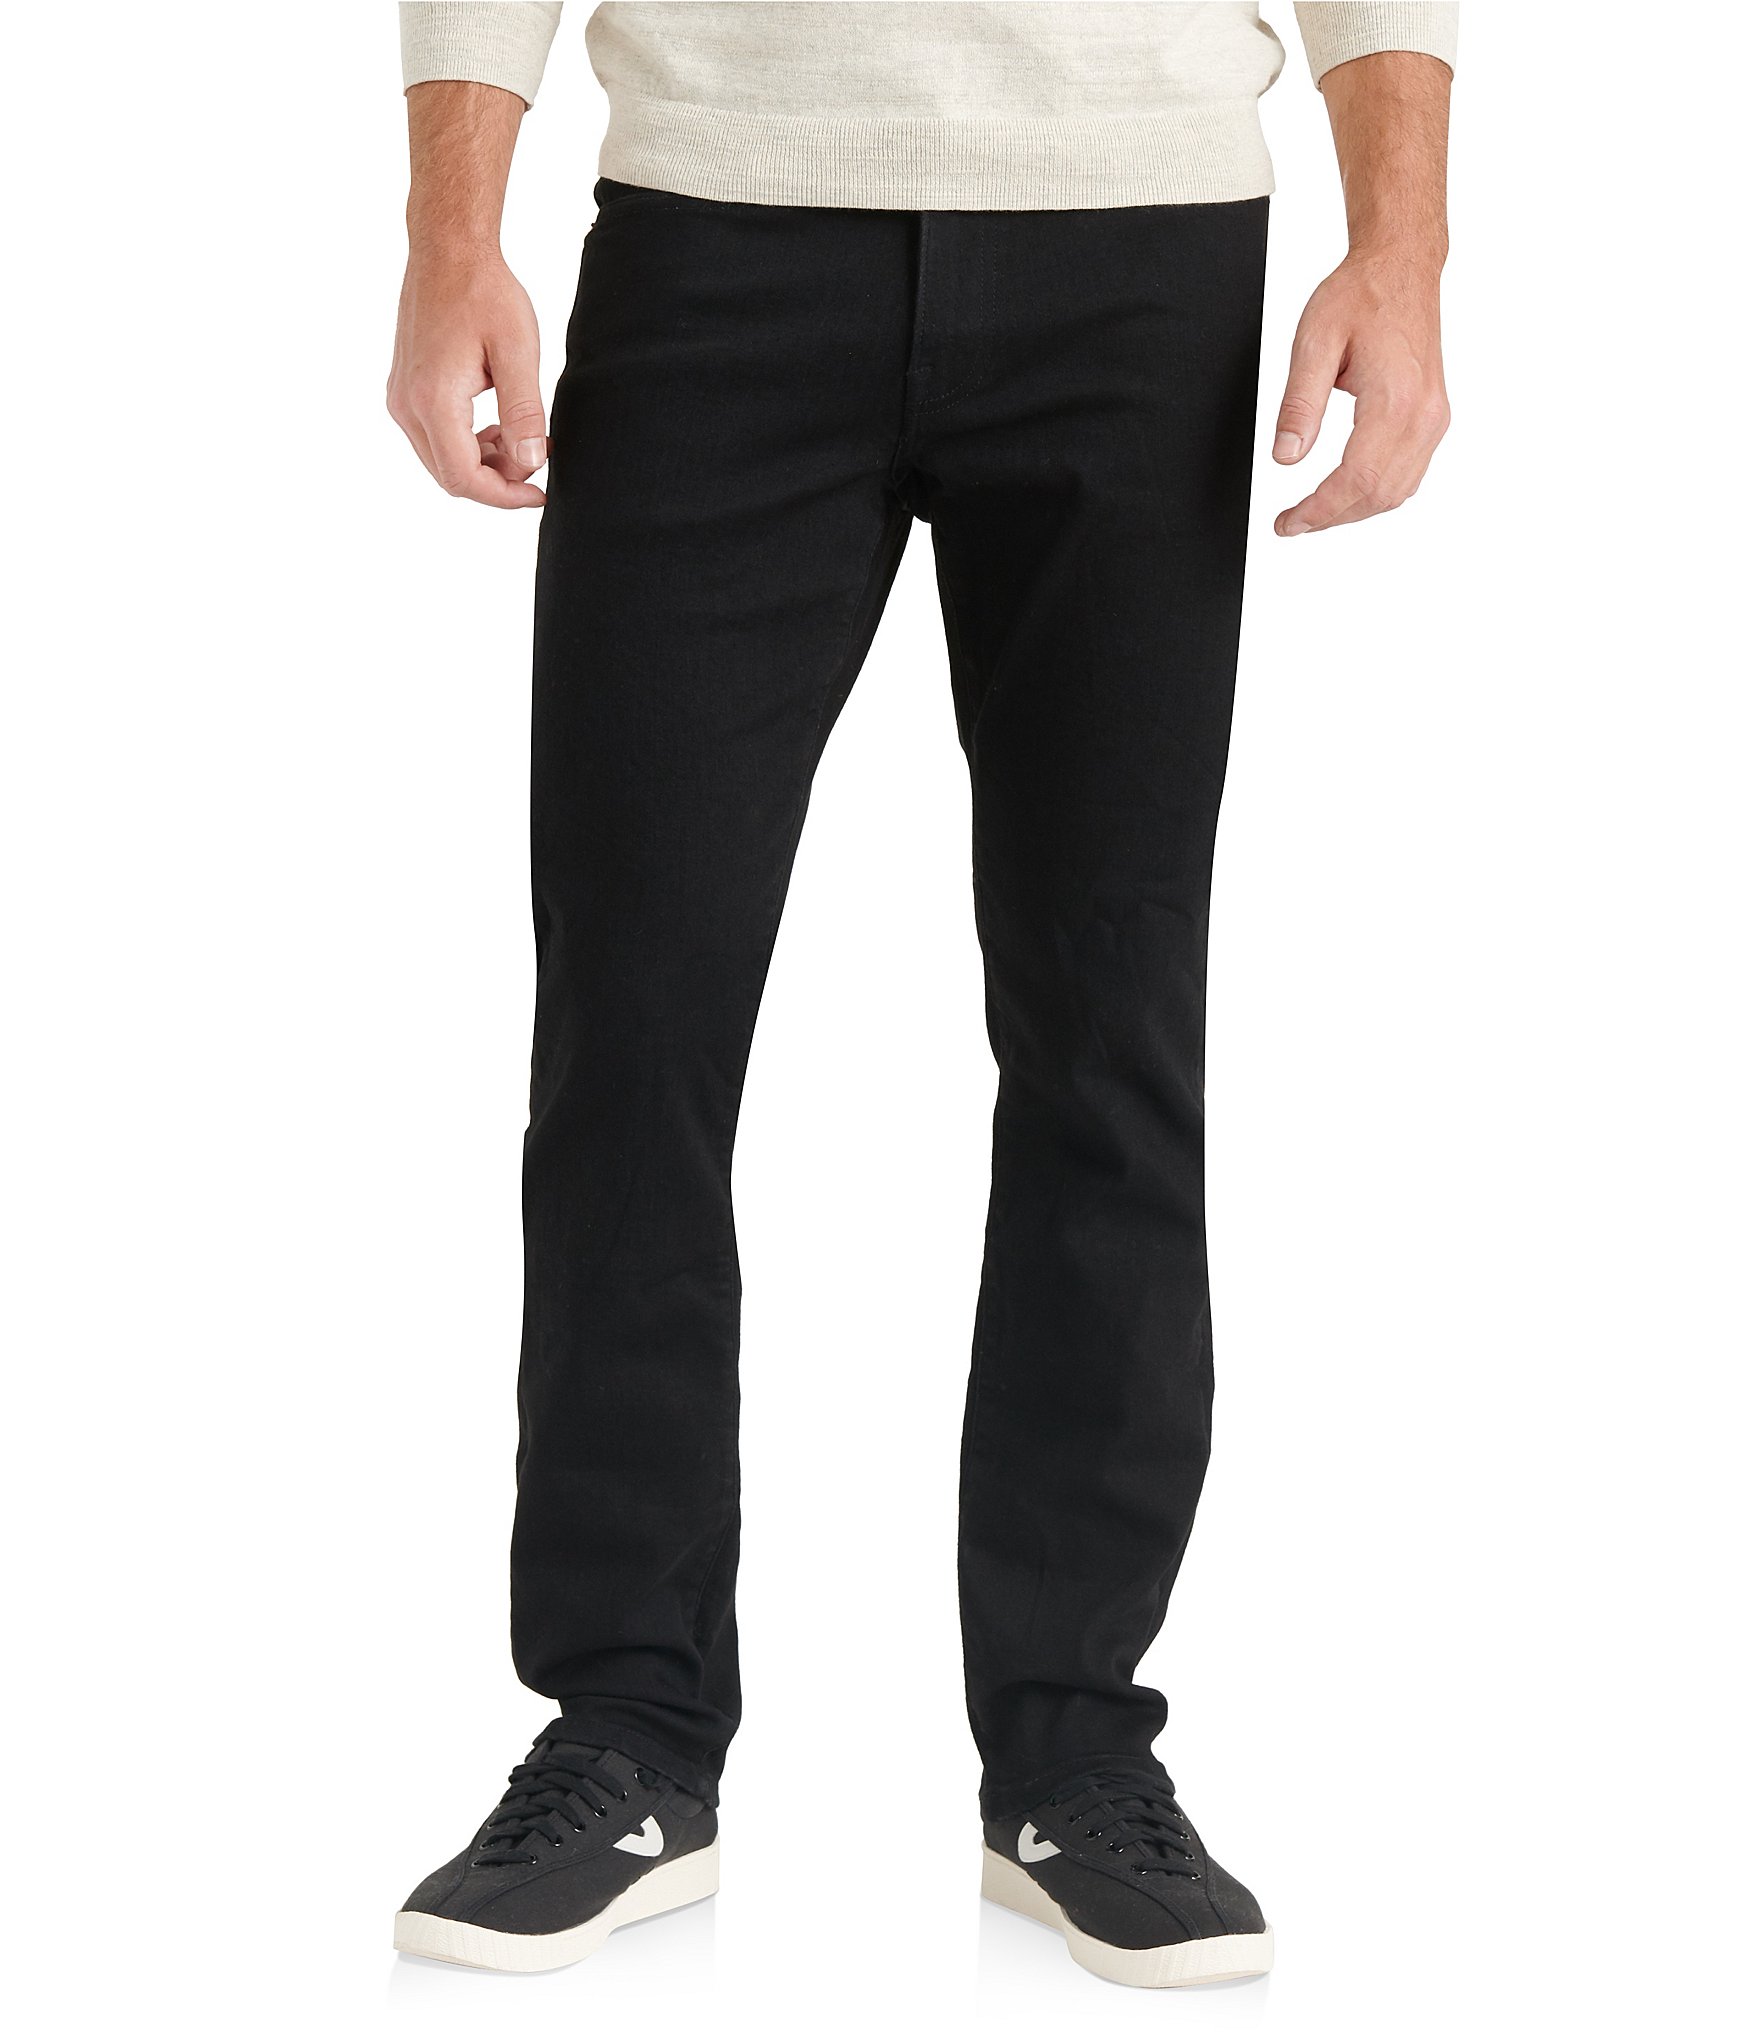 https://dimg.dillards.com/is/image/DillardsZoom/zoom/lucky-brand-black-rinse-410-athletic-slim-fit-jeans/00000000_zi_38381417-1896-4345-ab1a-cf056a3aab4e.jpg